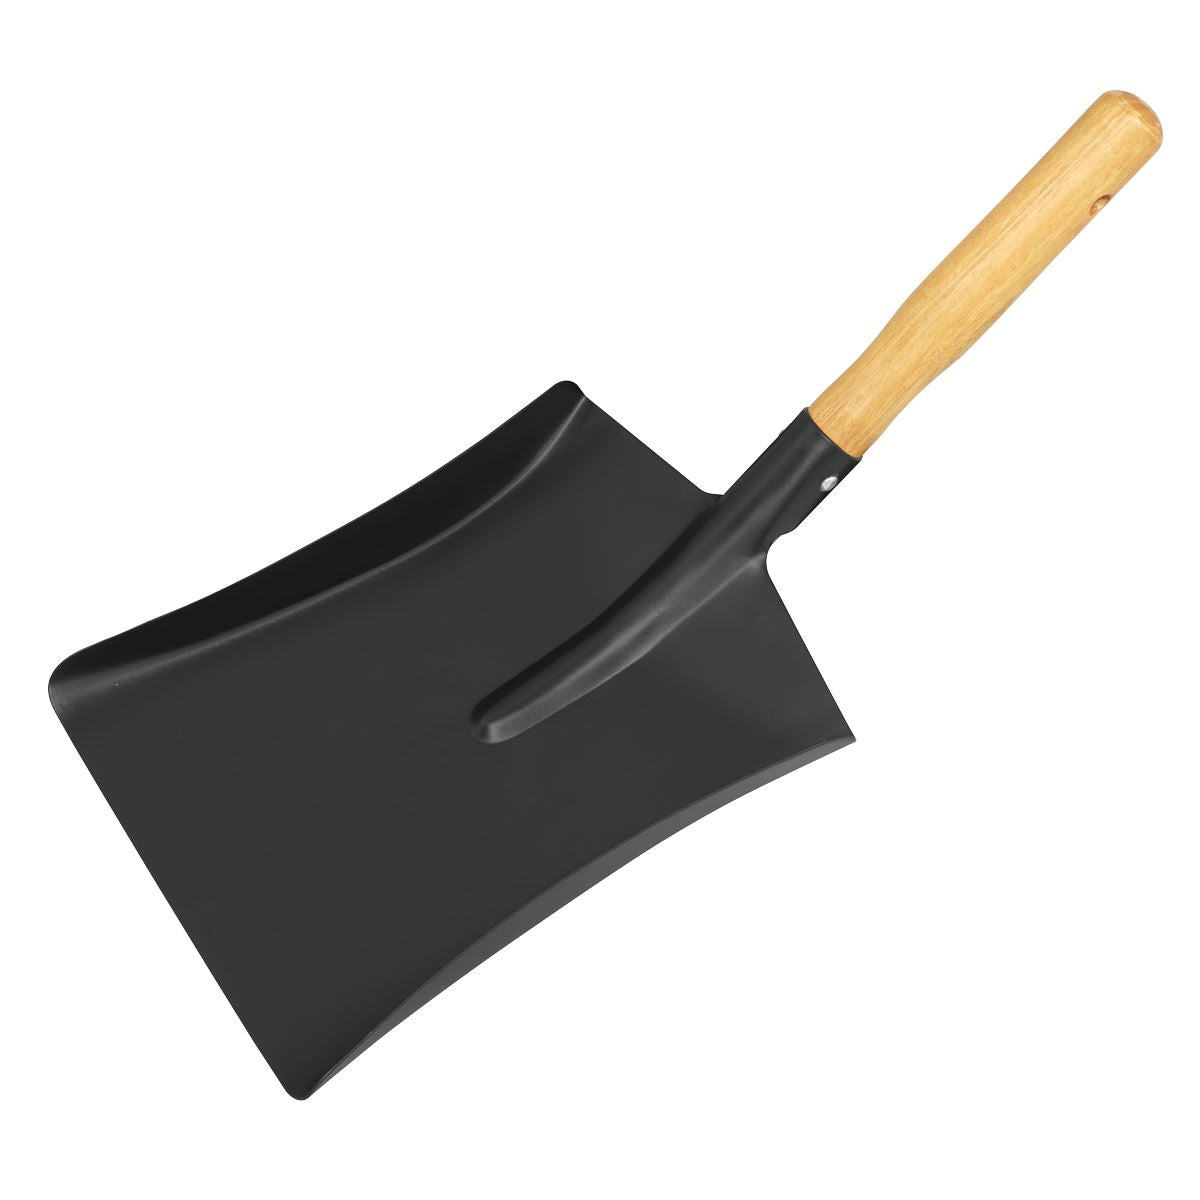 Sealey Coal shovel 8" with 228mm Wooden Handle